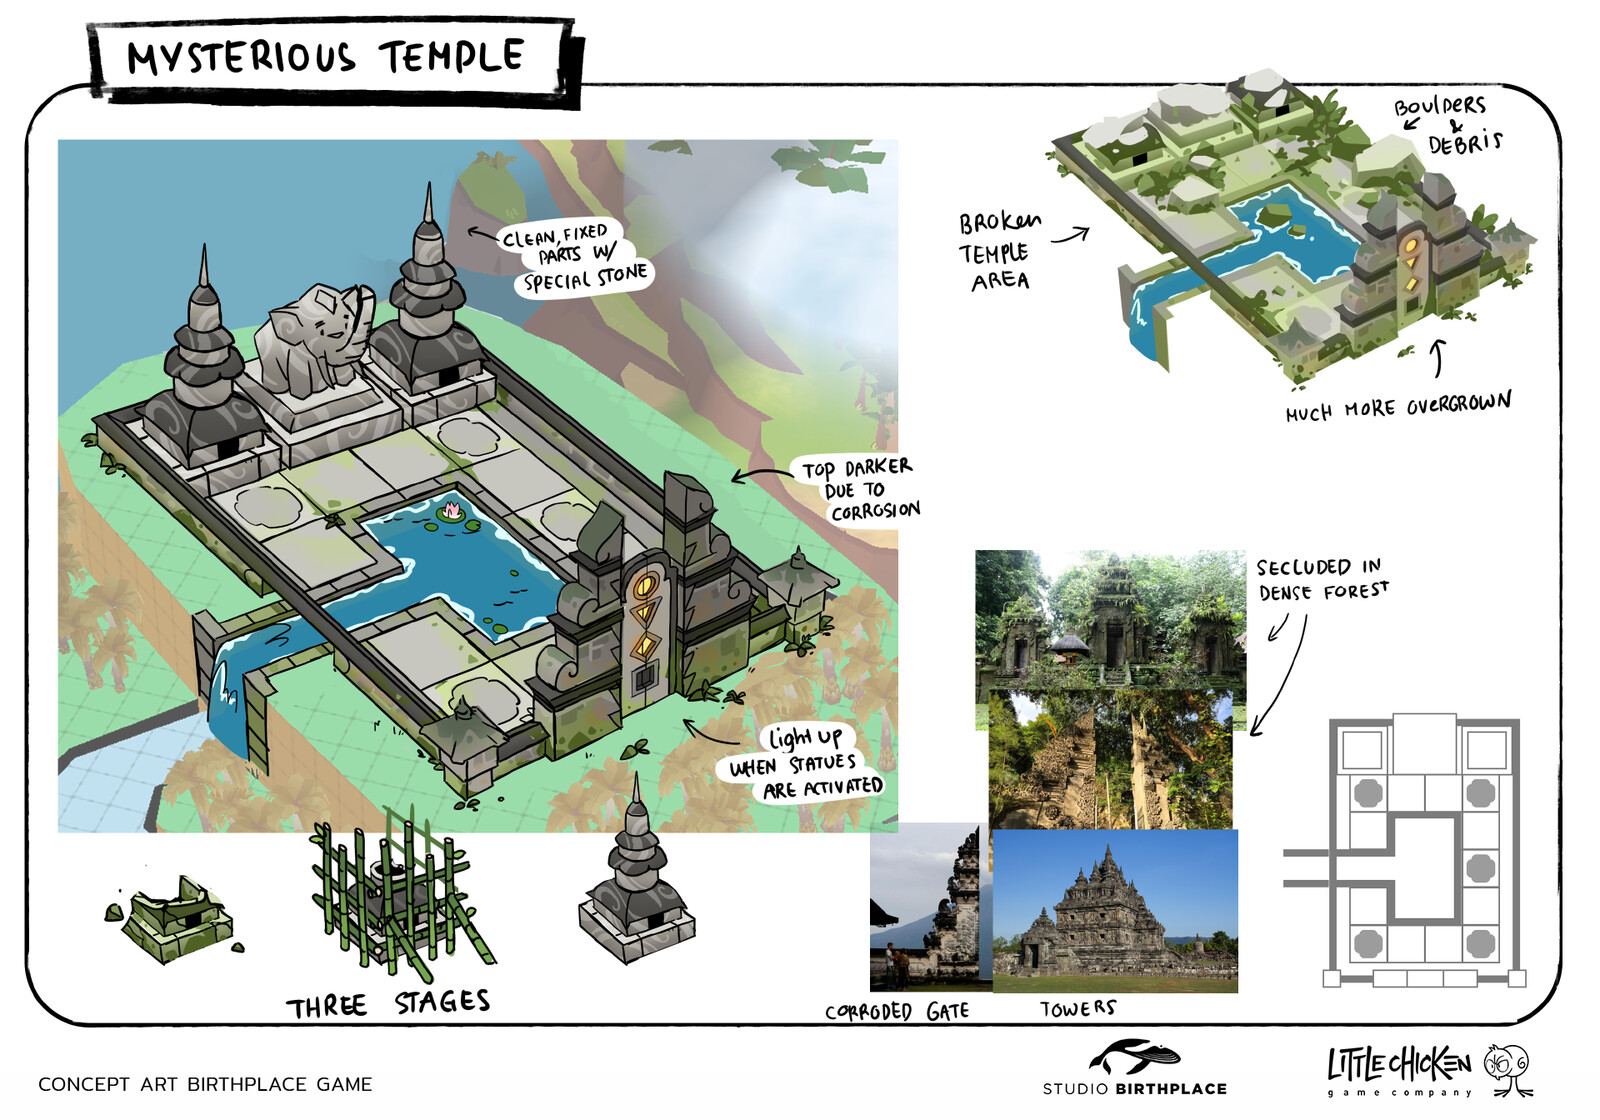 Mysterious temple concept sheet